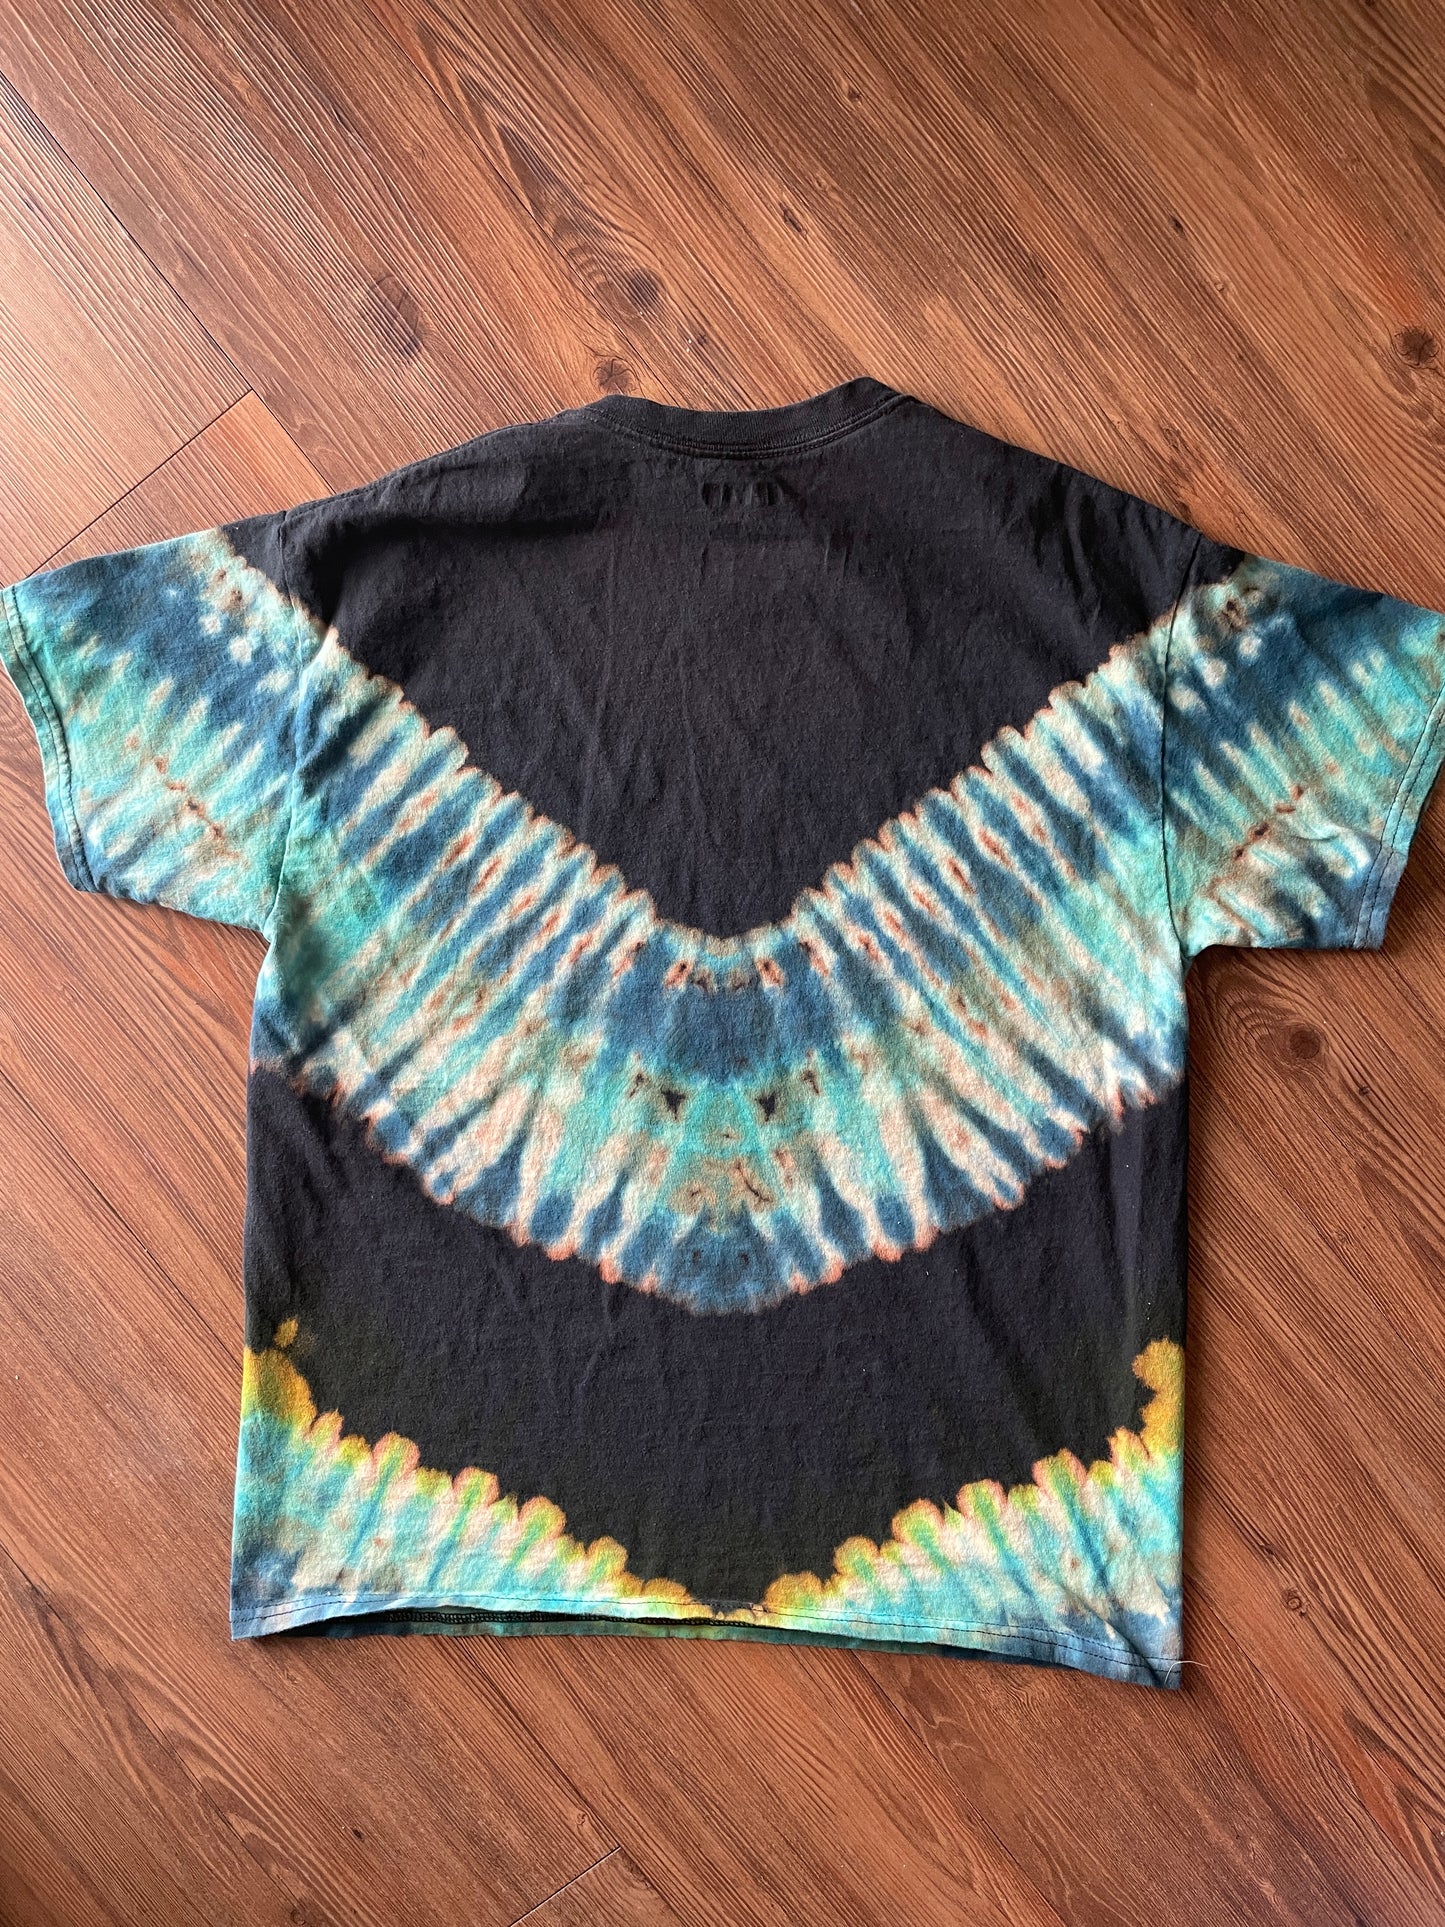 LARGE Men’s Vail Tie Dye T-Shirt | Shades of Blue Pleated Tie Dye Short Sleeve Top